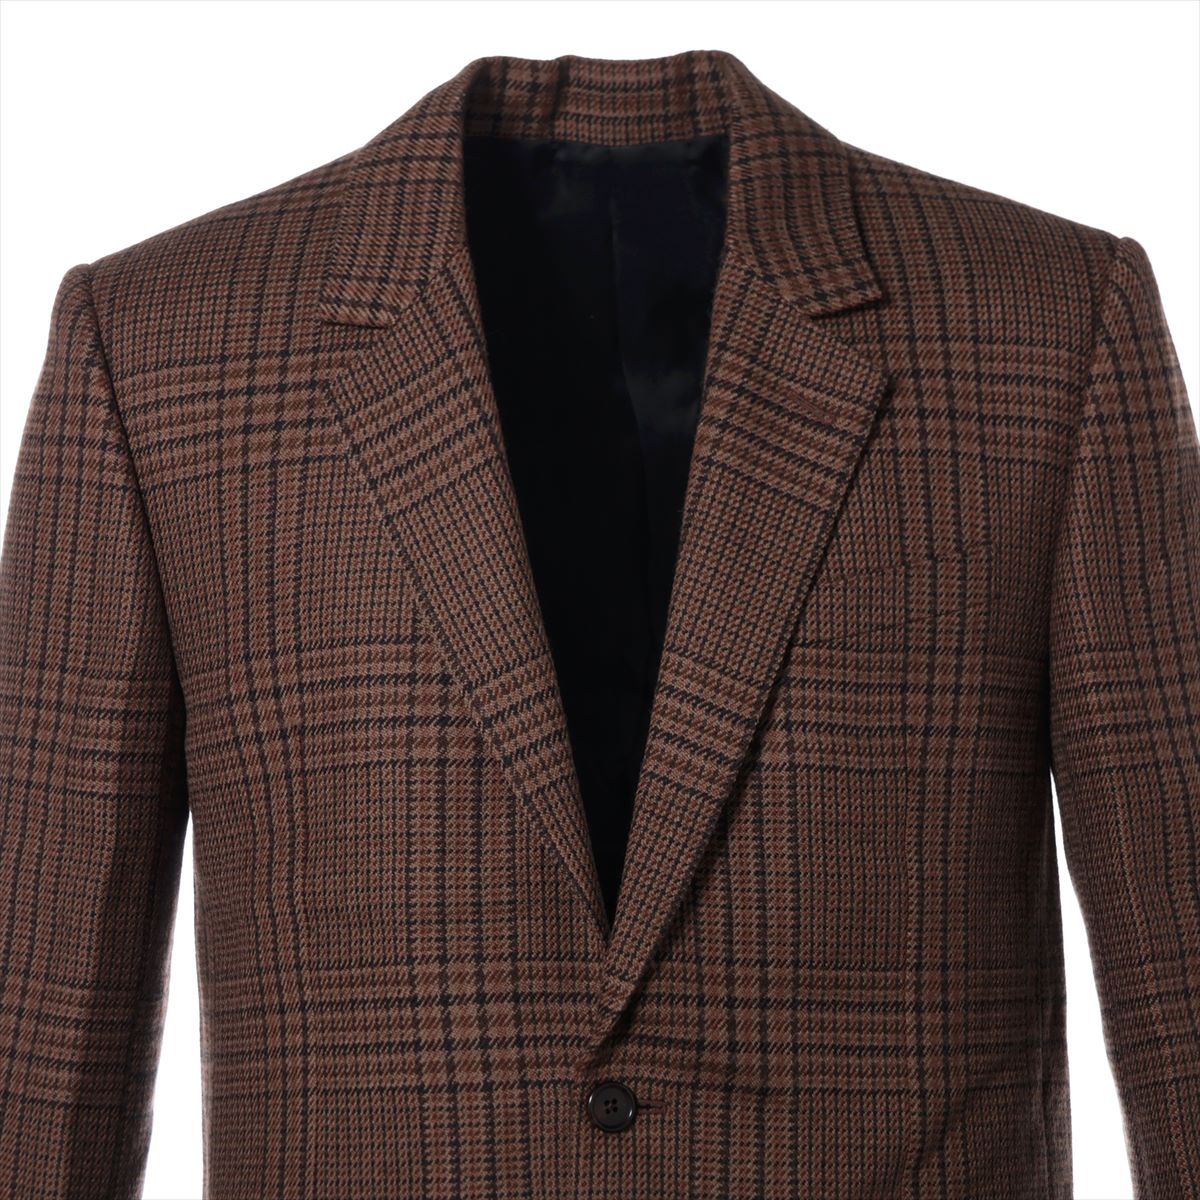 Celine wool x rayon Tailored Jacket 38 Men's Brown  2V49F9470 Has spare buttons